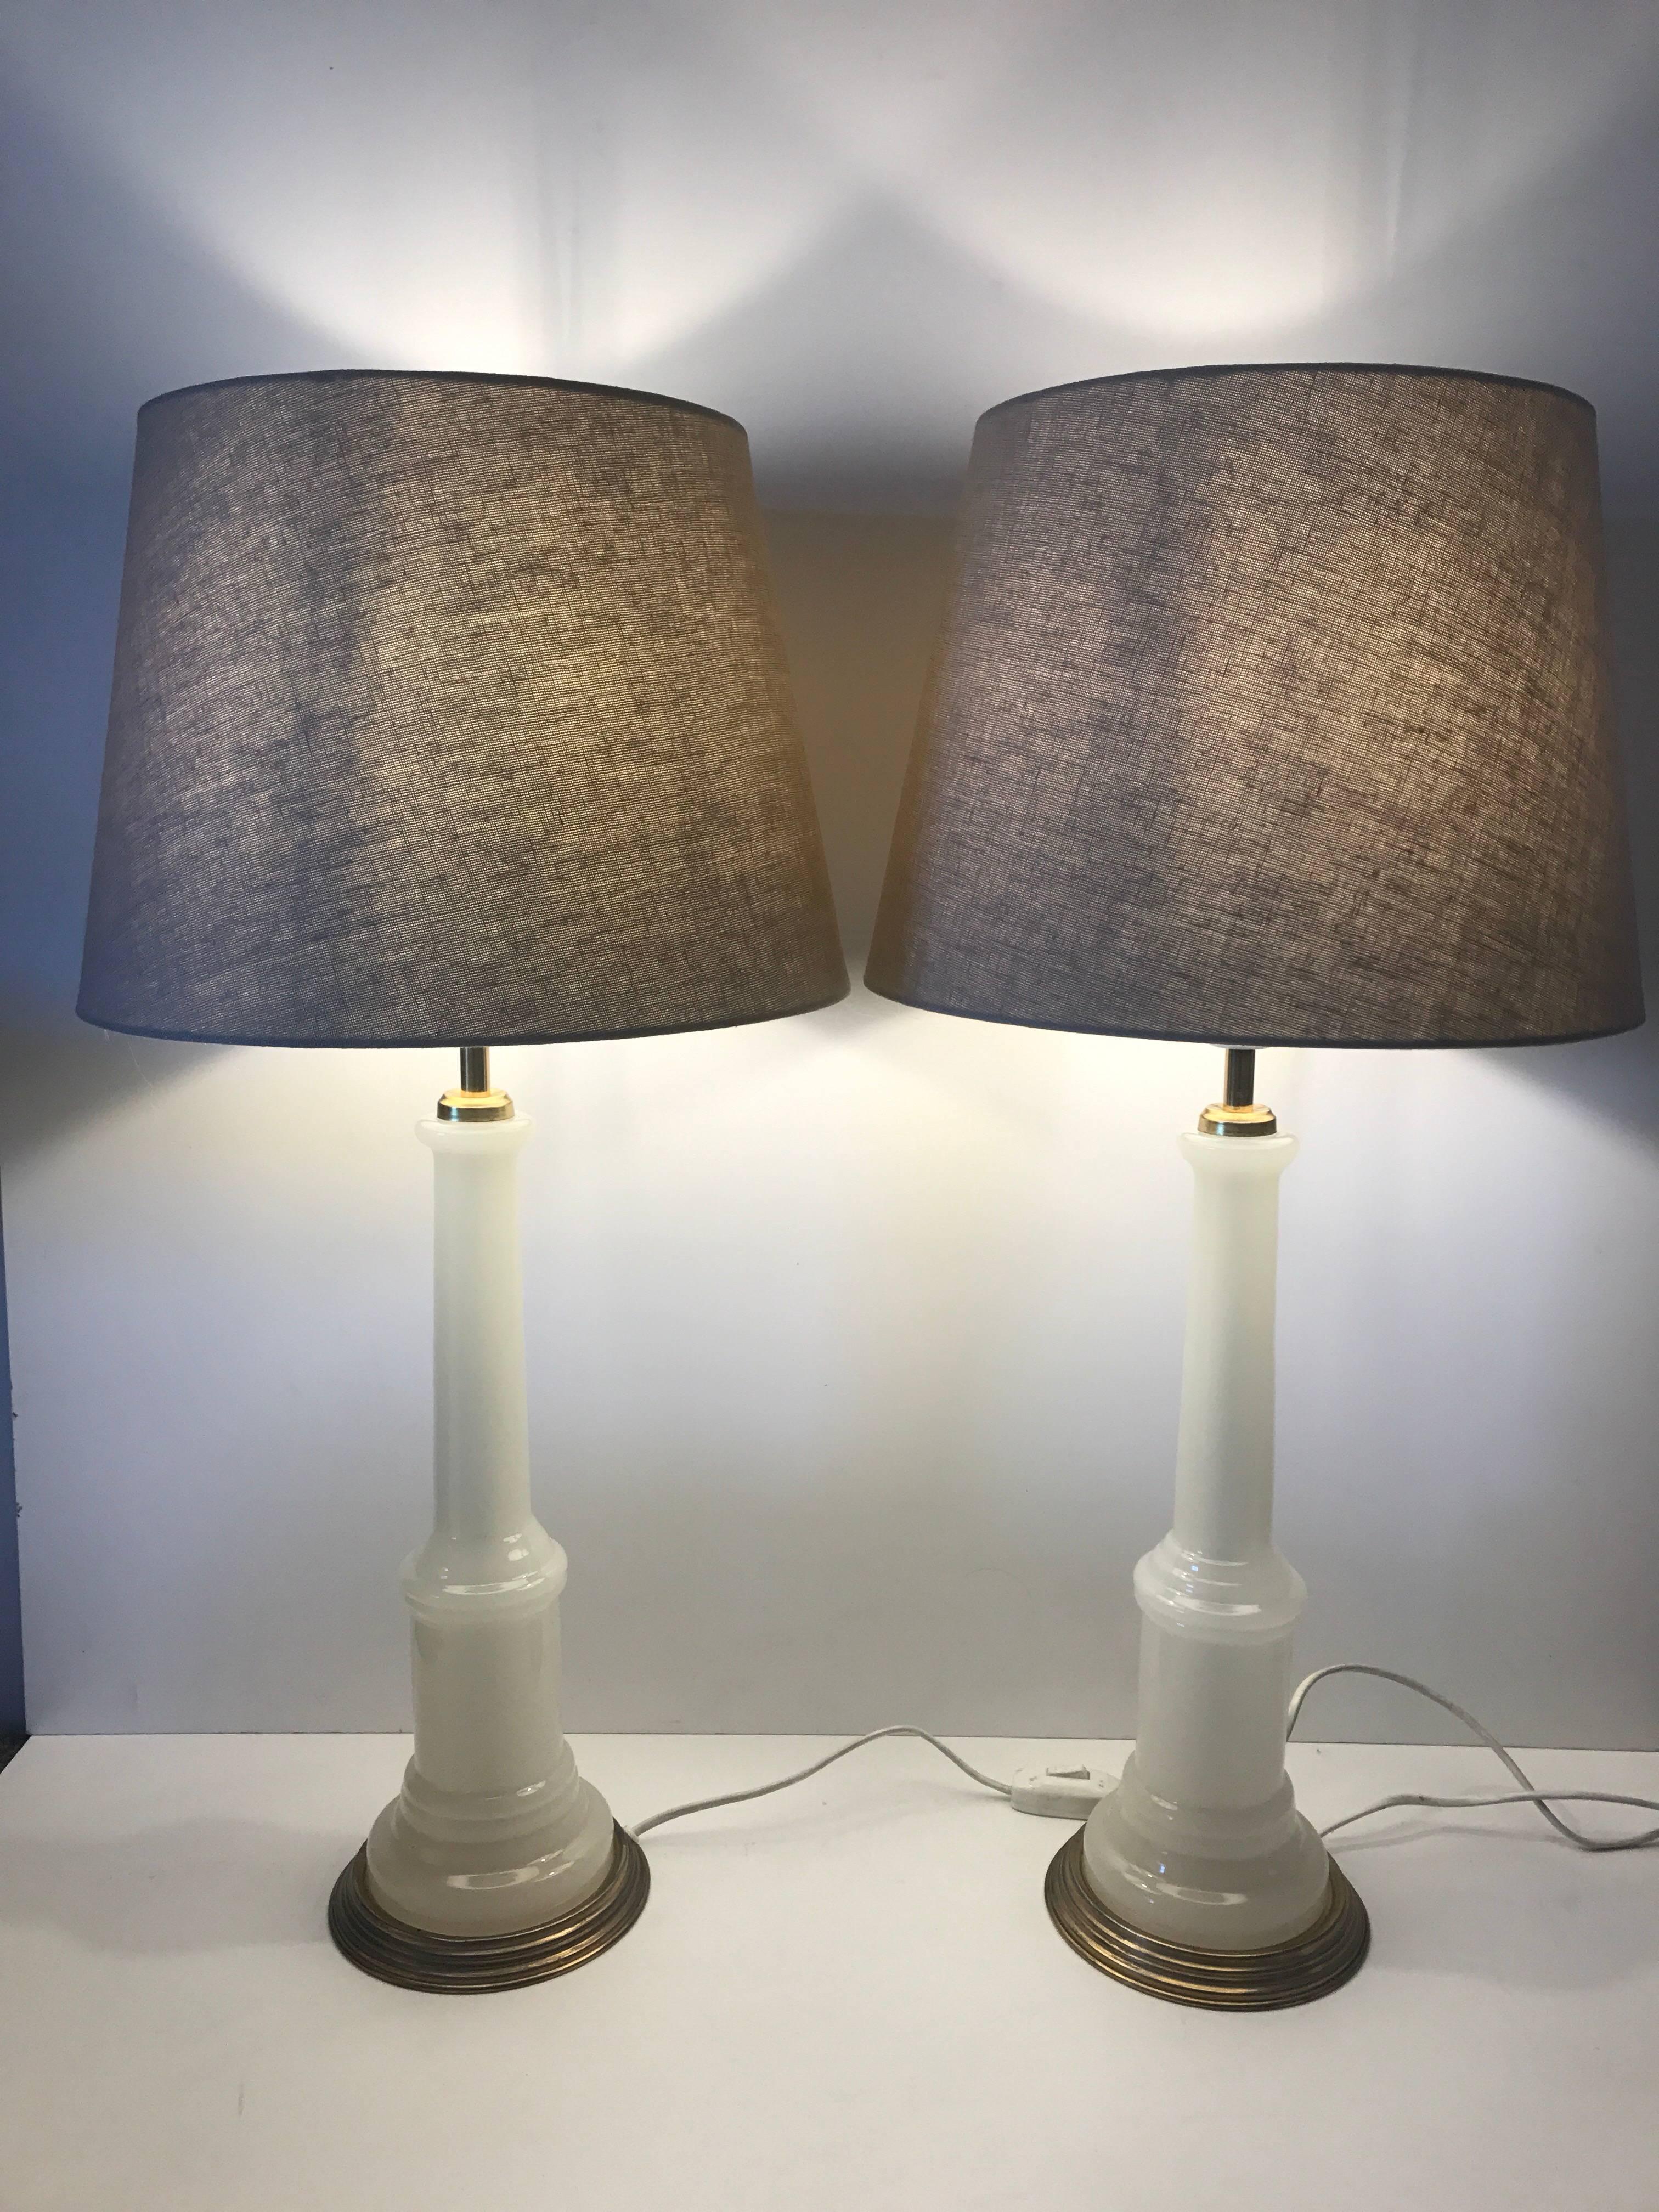 Pair of large Swedish Josef Frank opaline glass table lamps Svenskt Tenn model 2583. A beautiful pair of white color opaline glass and brass lamps. They are large and measure 67 cm including the shade in height and the shade has a bottom diameter of